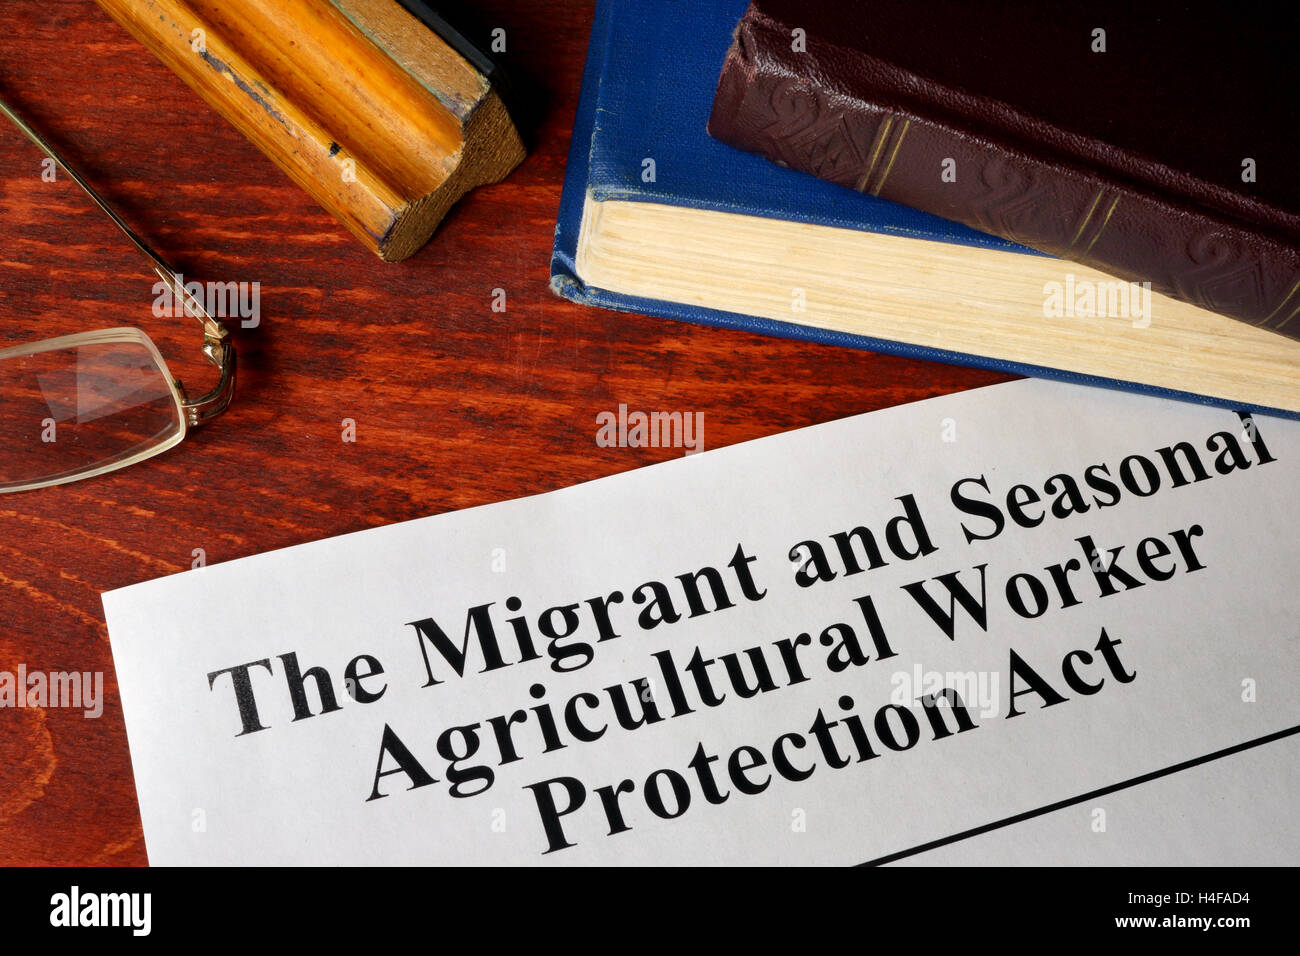 The Migrant and Seasonal Agricultural Worker Protection Act and a book. awpa/mspa Stock Photo